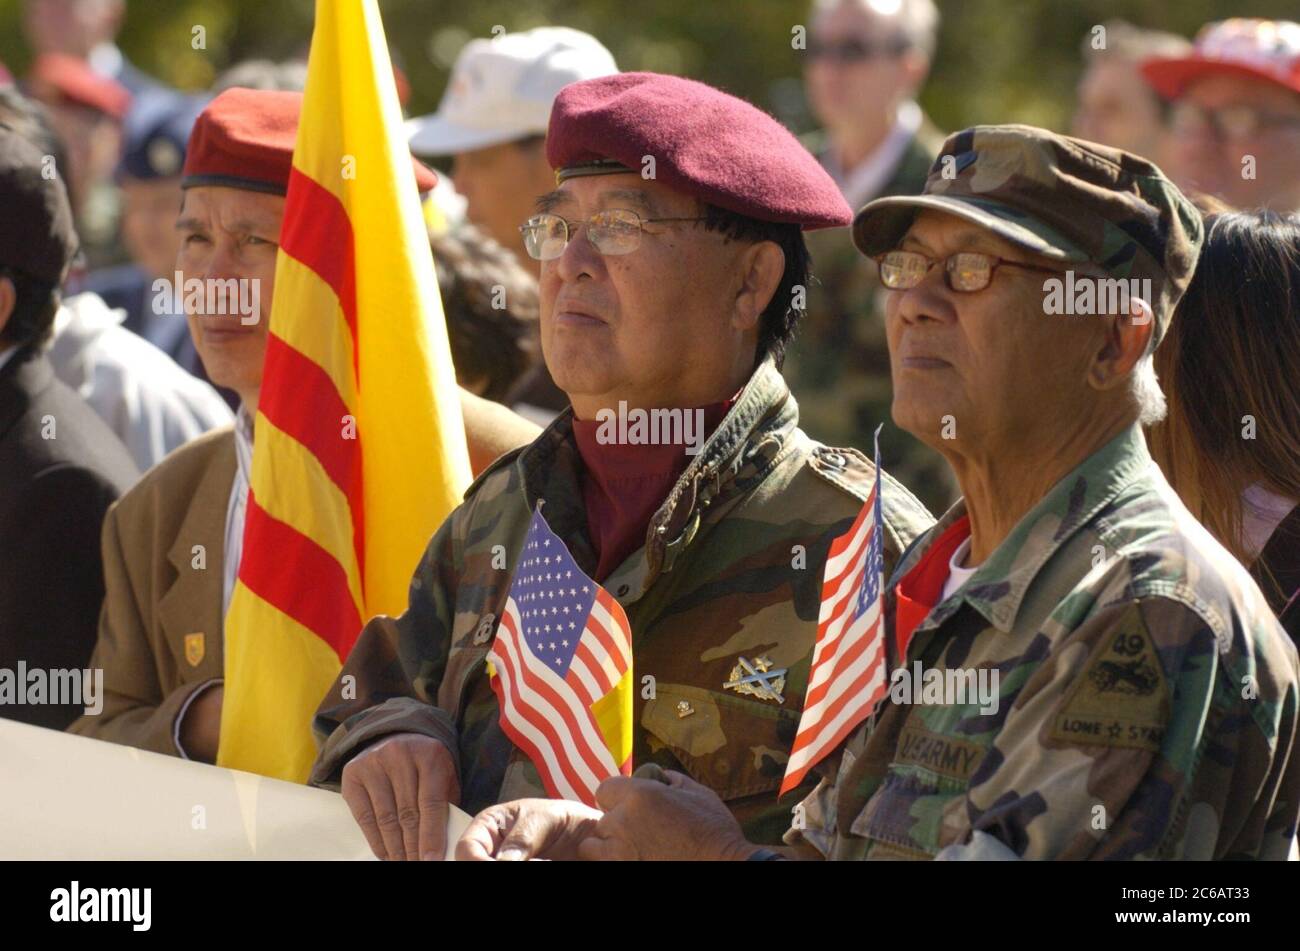 Austin, Texas USA, November 11 2004: Veteran's Day parade and ceremony at the Texas Capitol at which former Republic of Vietnam soldiers were honored for their service alongside U.S. troops during the Vietnam War.  ©Bob Daemmrich Stock Photo